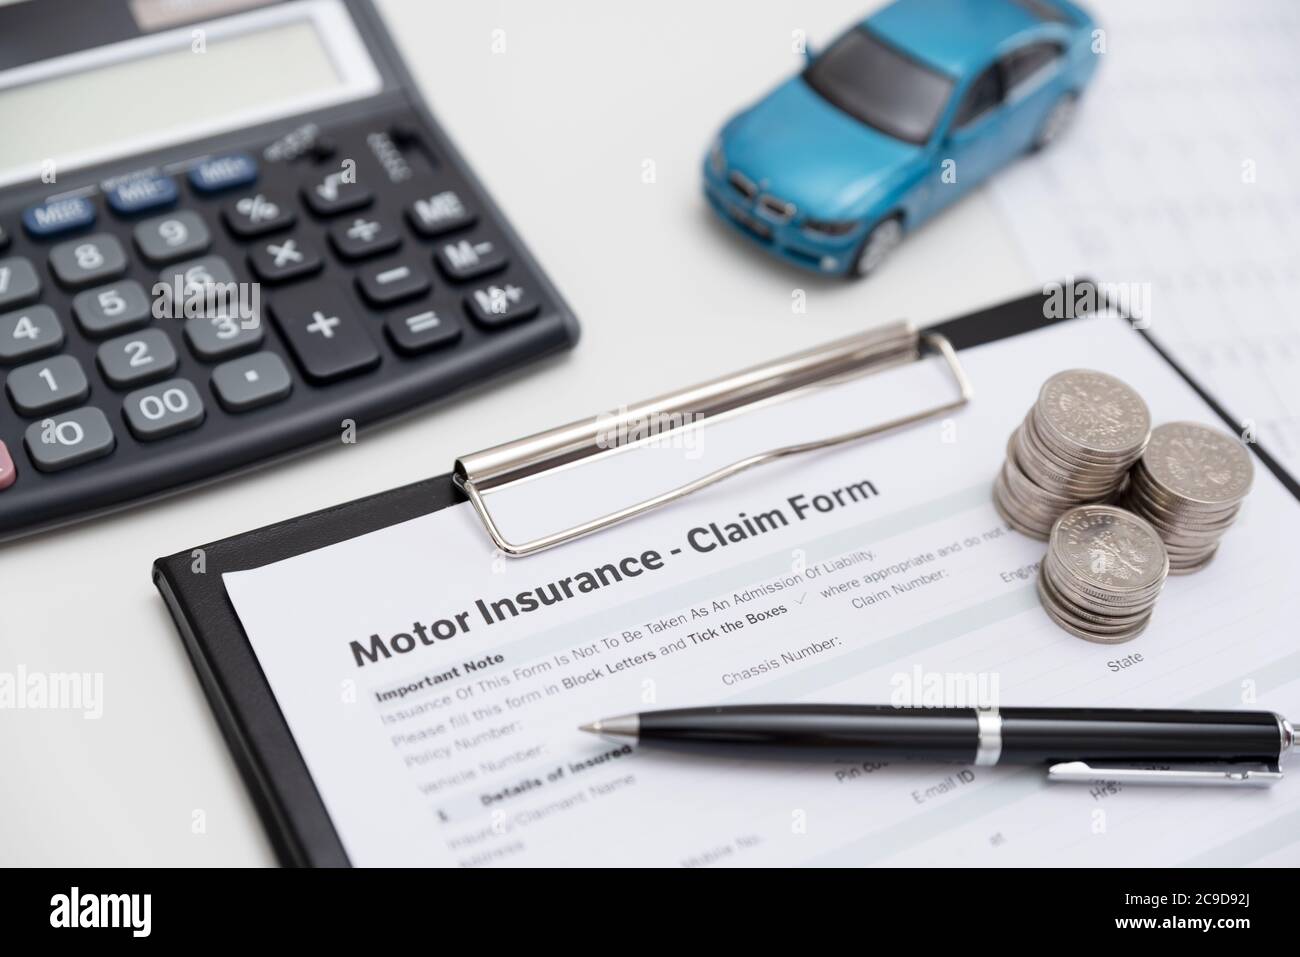 Motor or car insurance claim form with coin stack, calculator and car model. Stock Photo